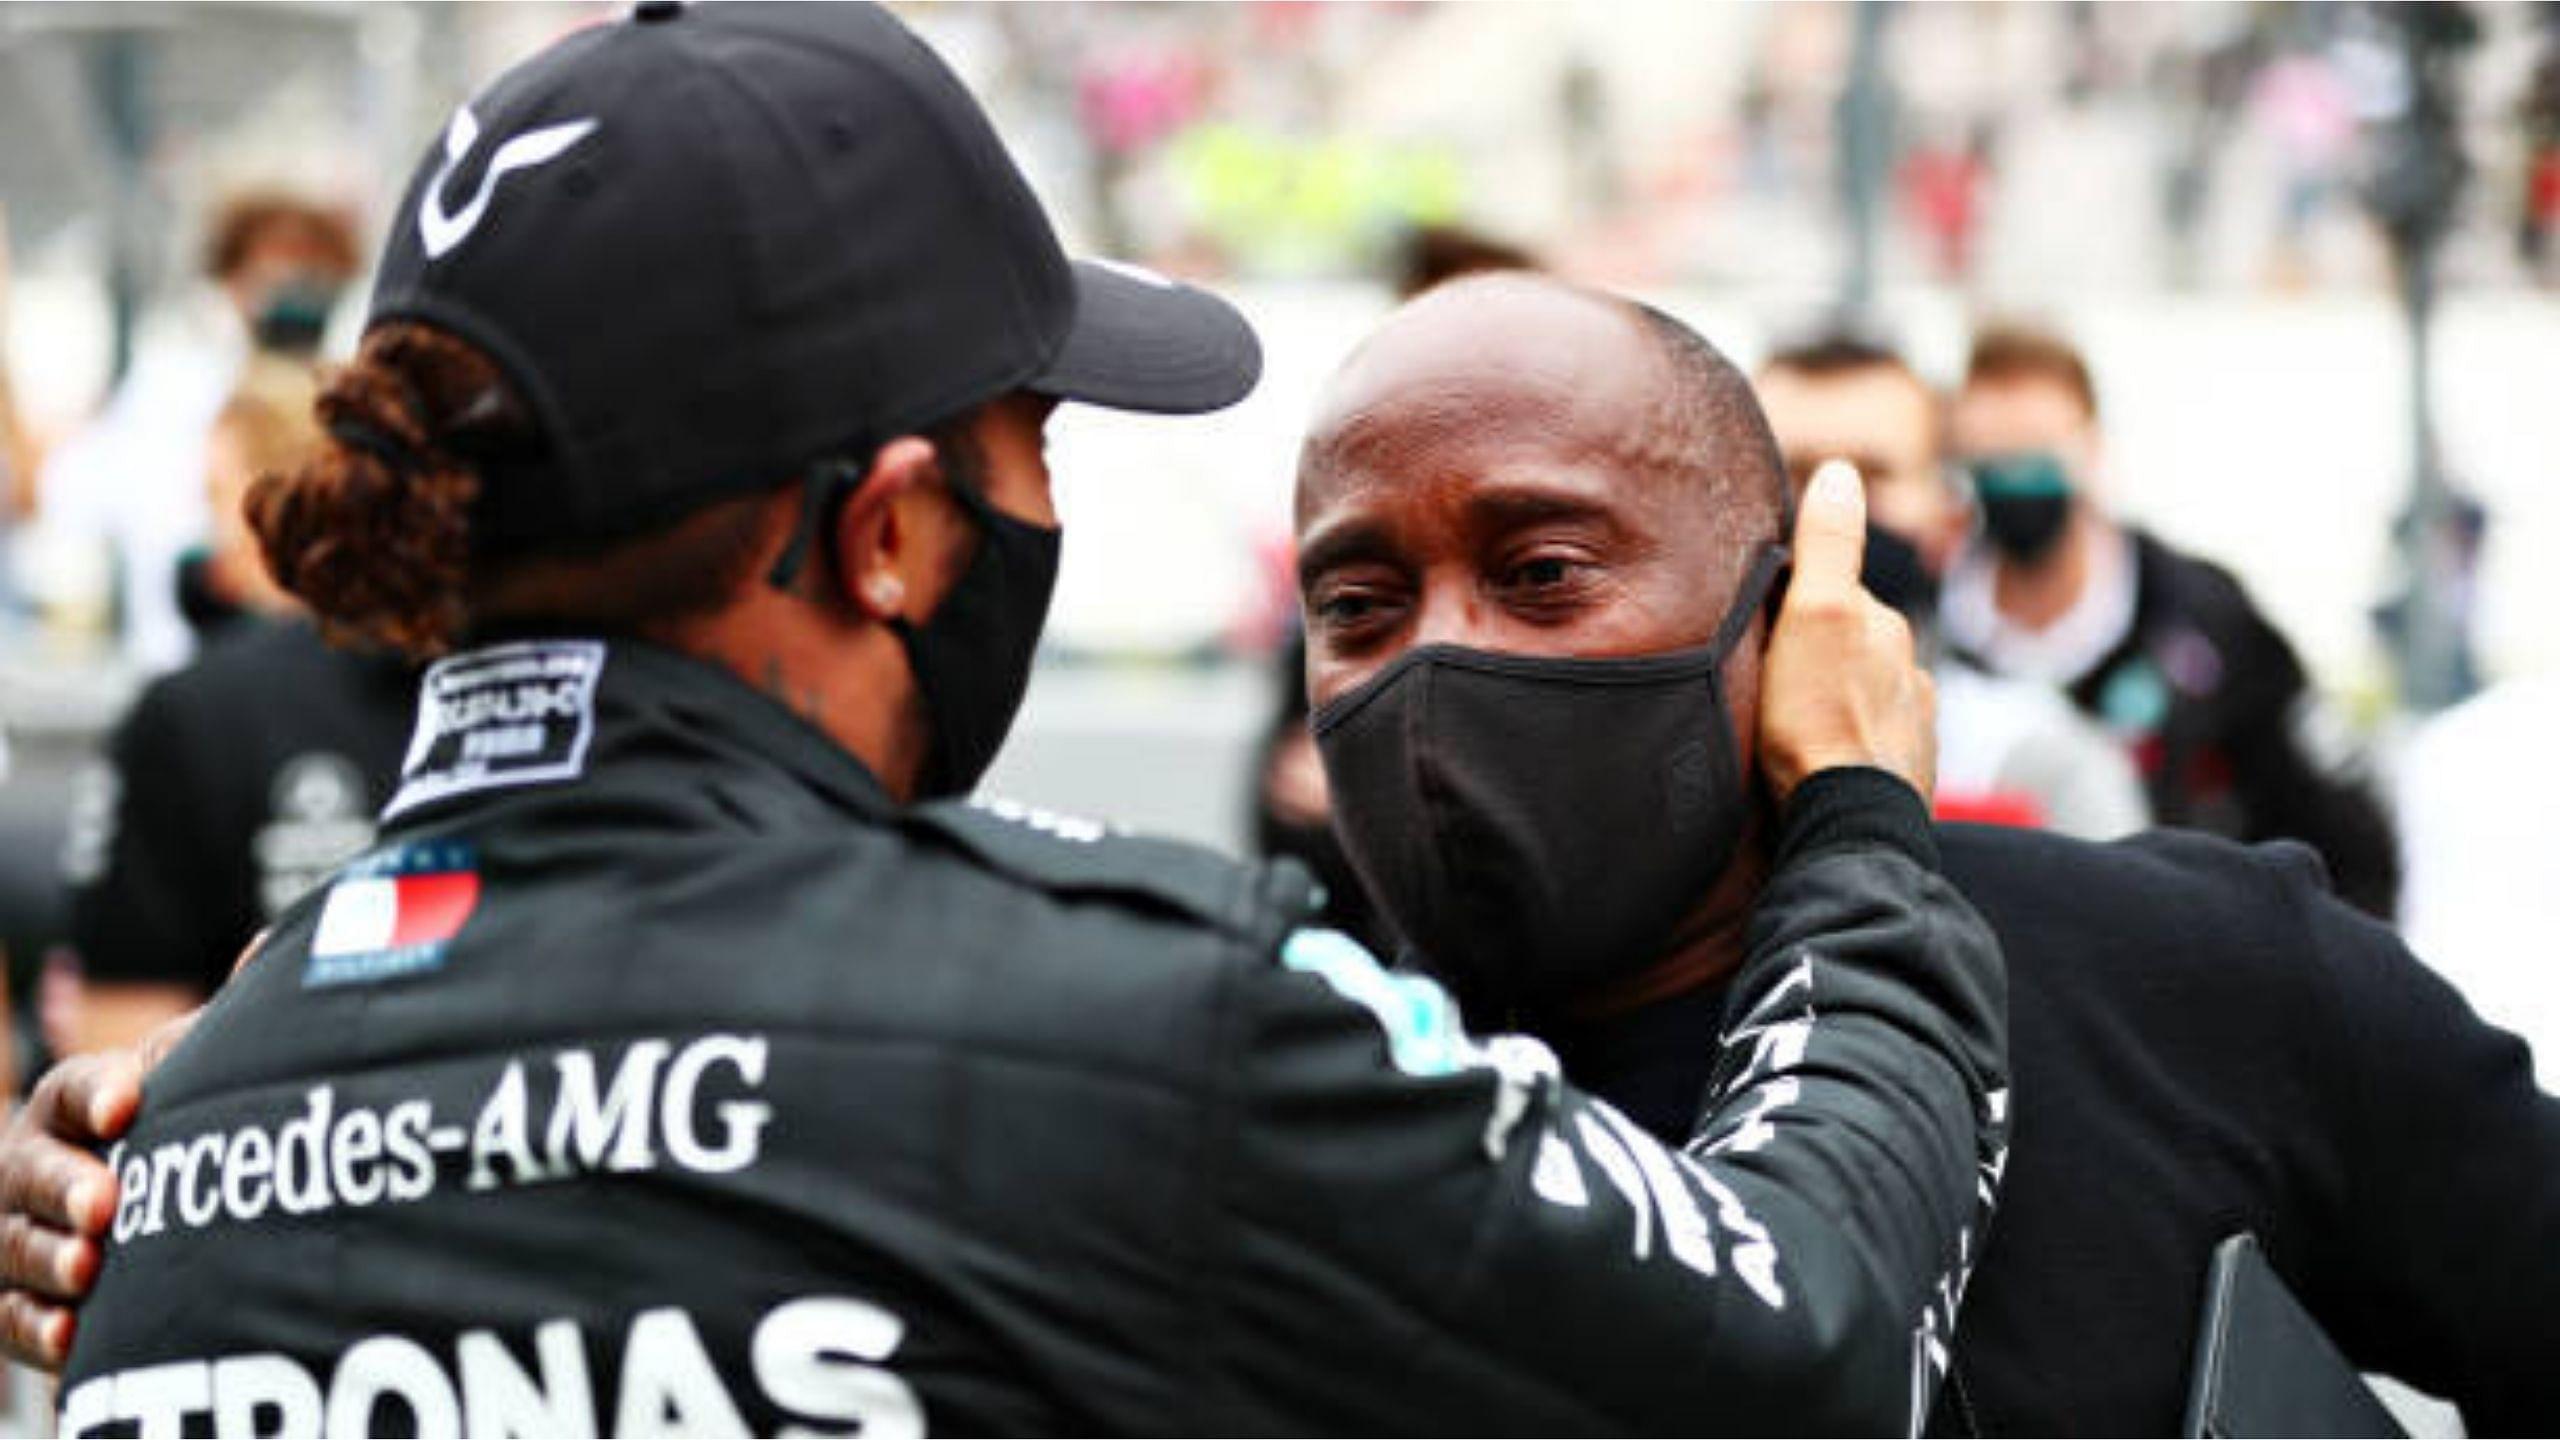 "I can’t afford it Lewis" - Anthony Hamilton reveals tribulations before Lewis became the global Formula One superstar